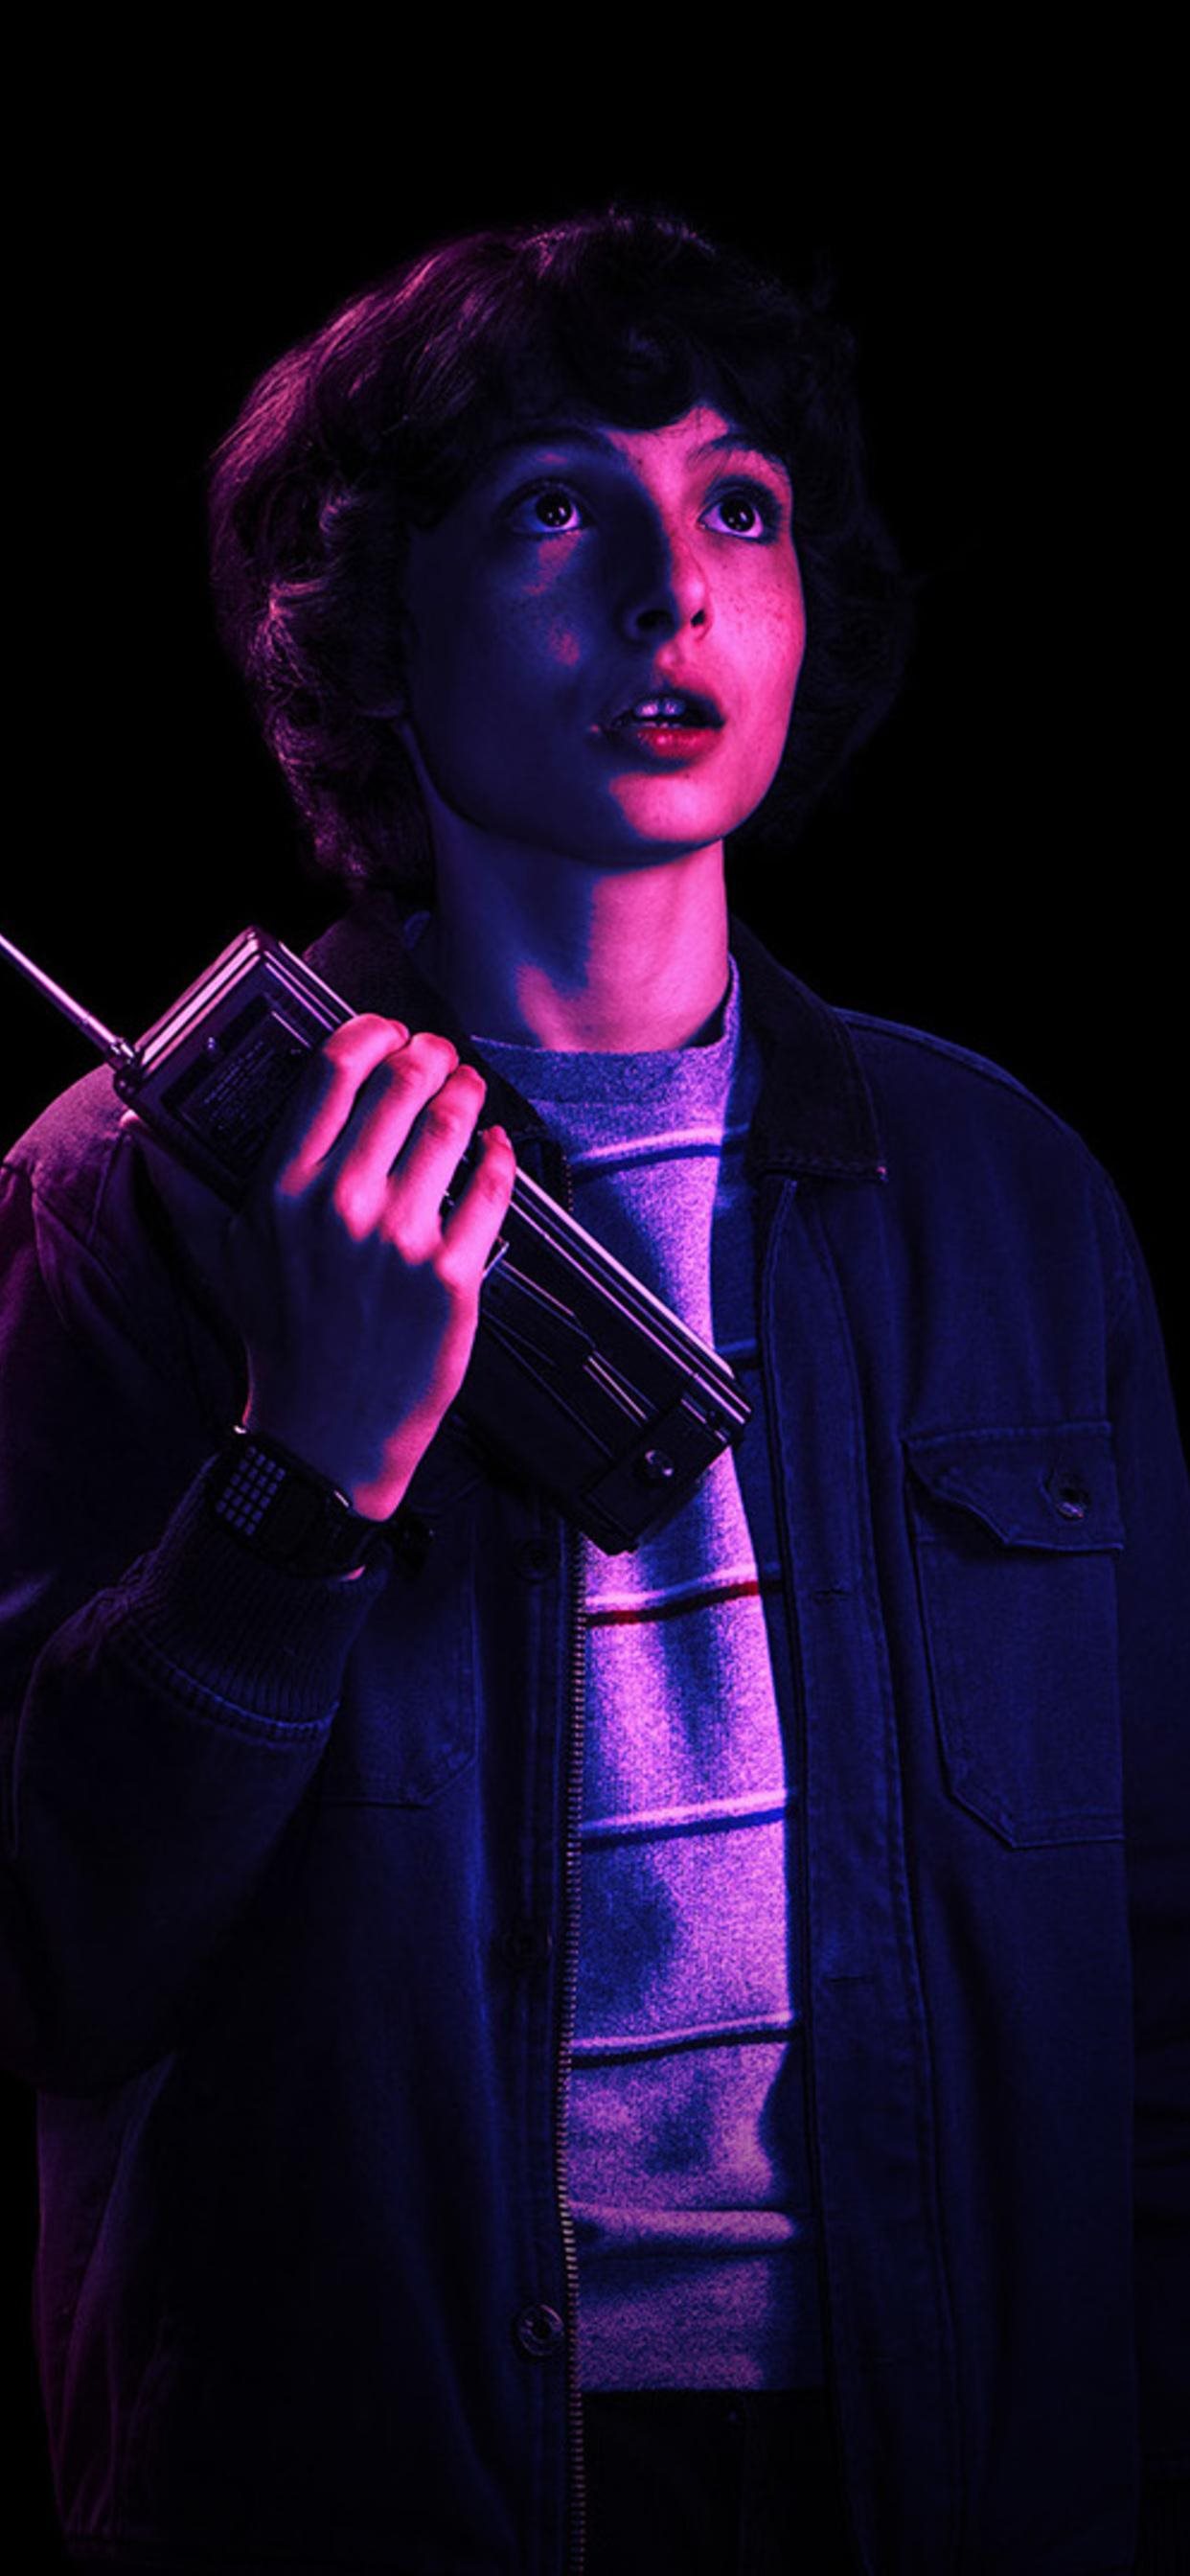 stranger things wallpaper  eleven spying  Eleven stranger things Stranger  things aesthetic Stranger things poster